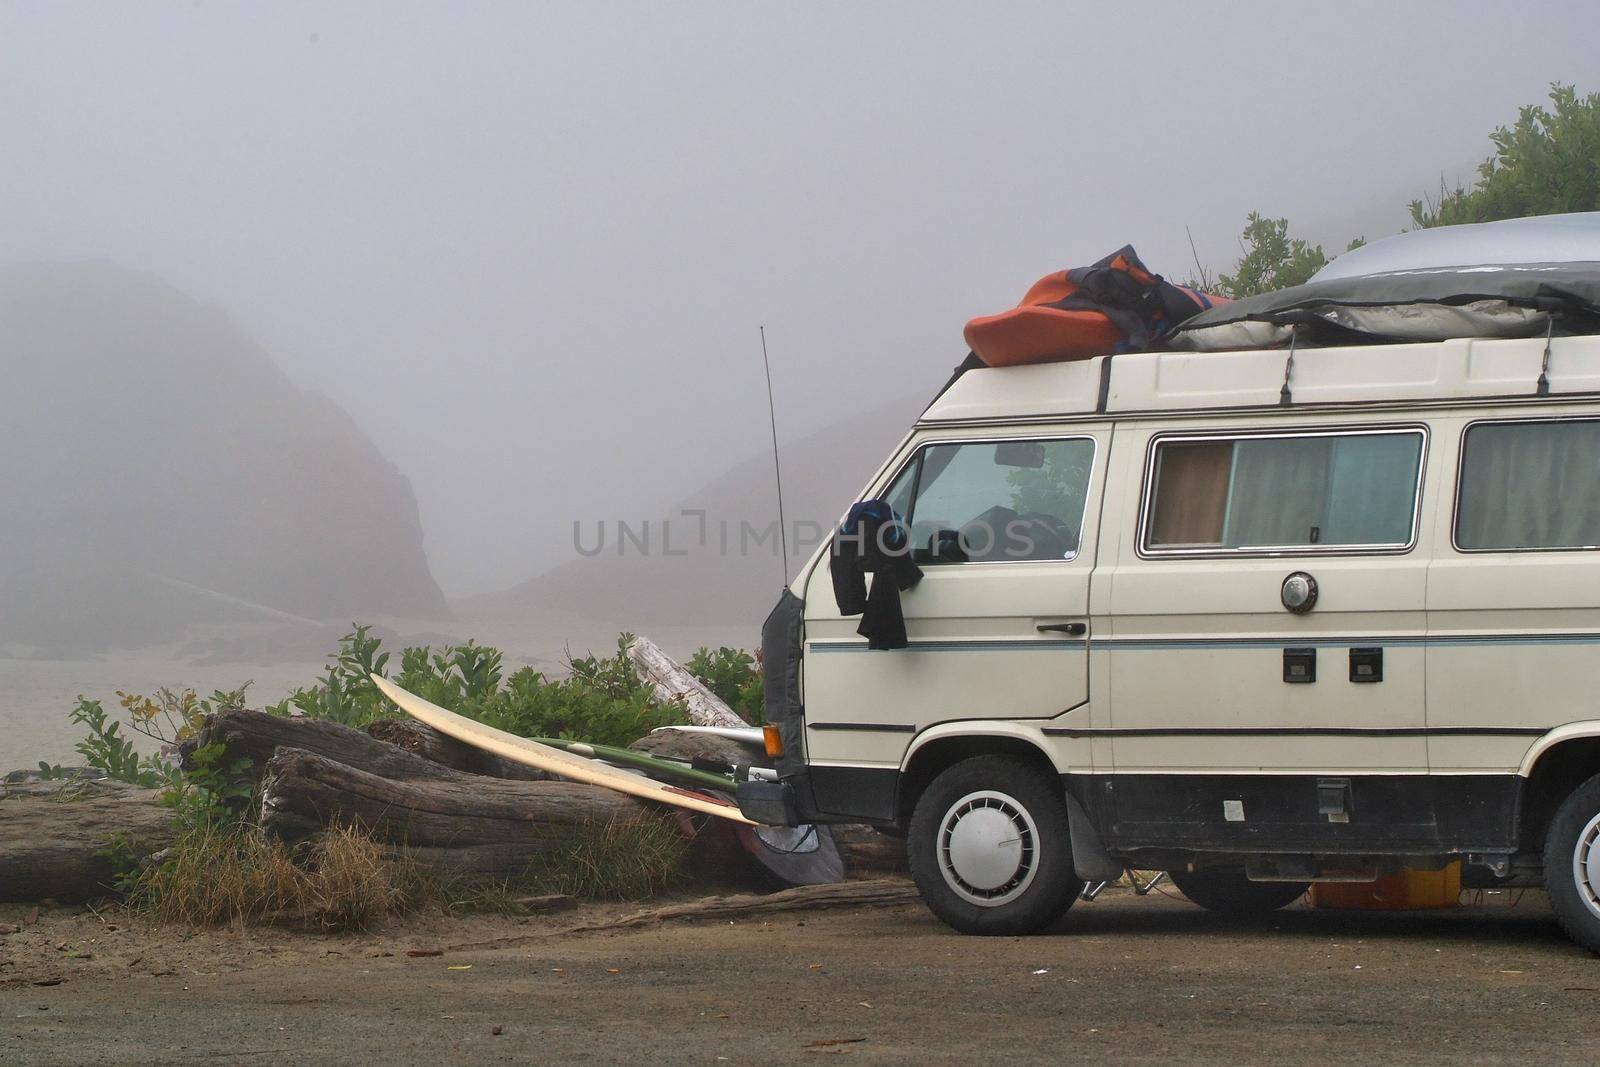 A parked van loaded with surfboards and gear parked at the beach in Tofino in British Columbia. High quality photo